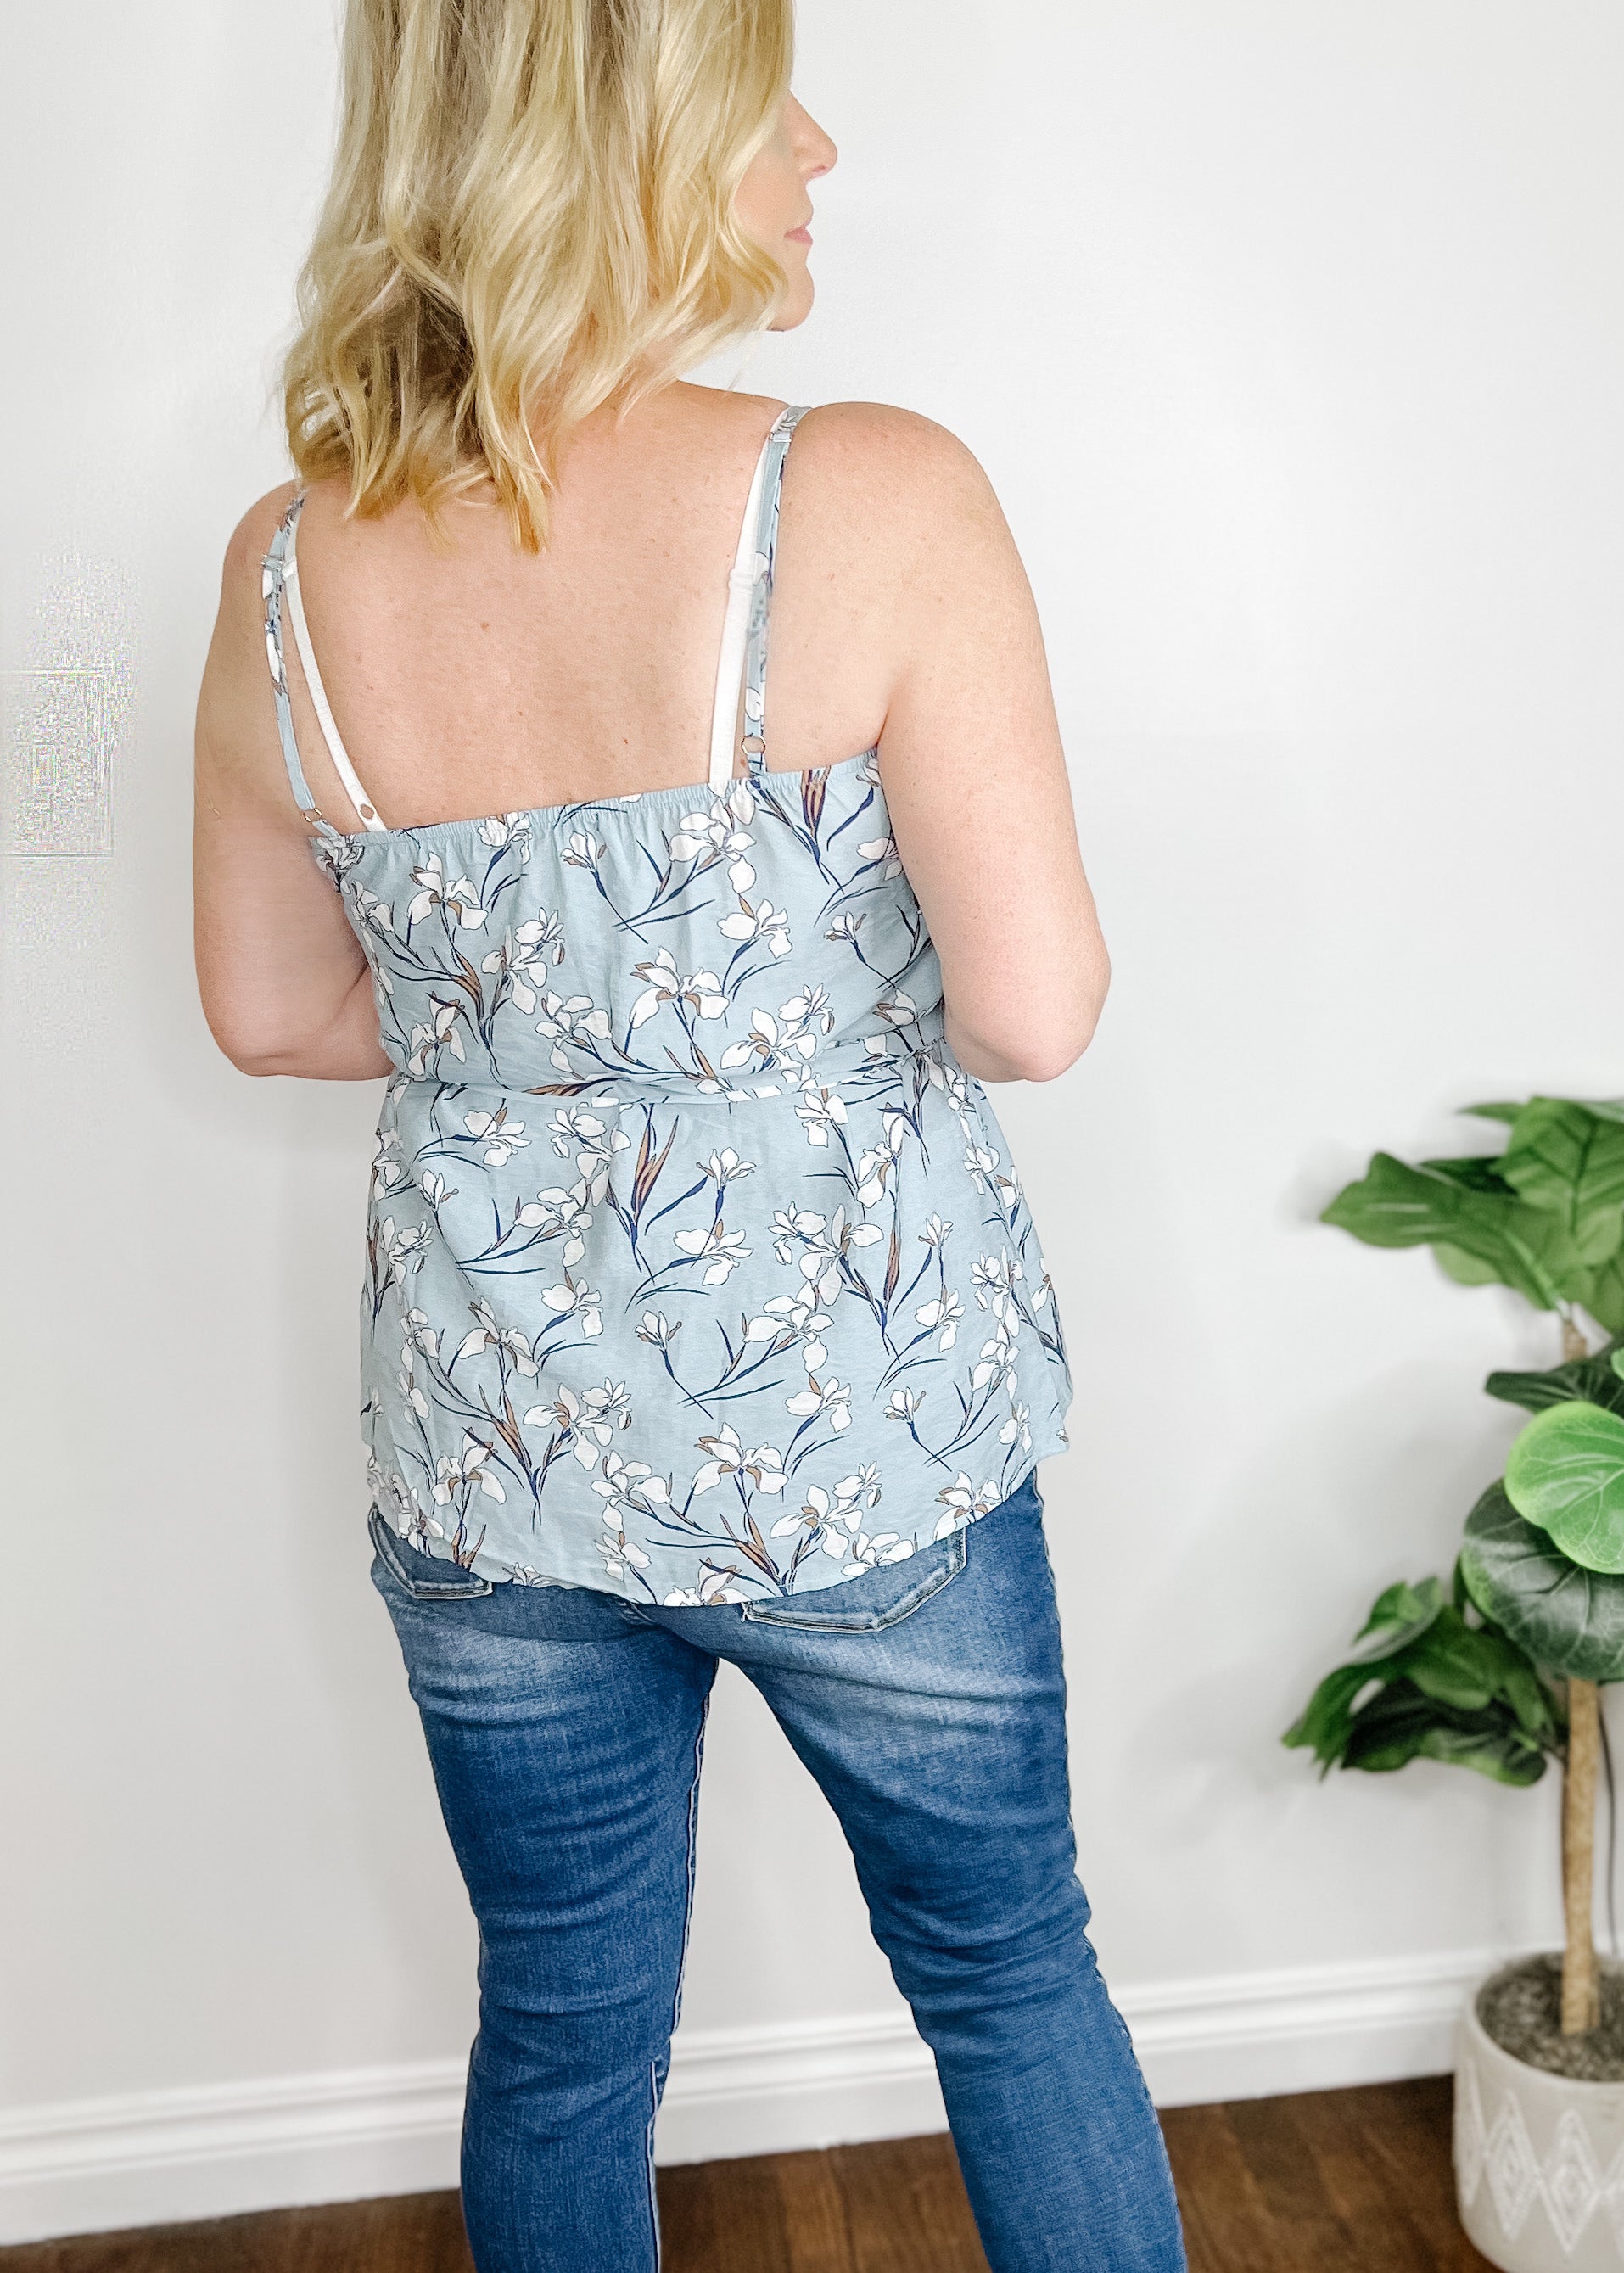 Baby blue tank top with a soft floral print. Adjustable straps, button front and front tie. 